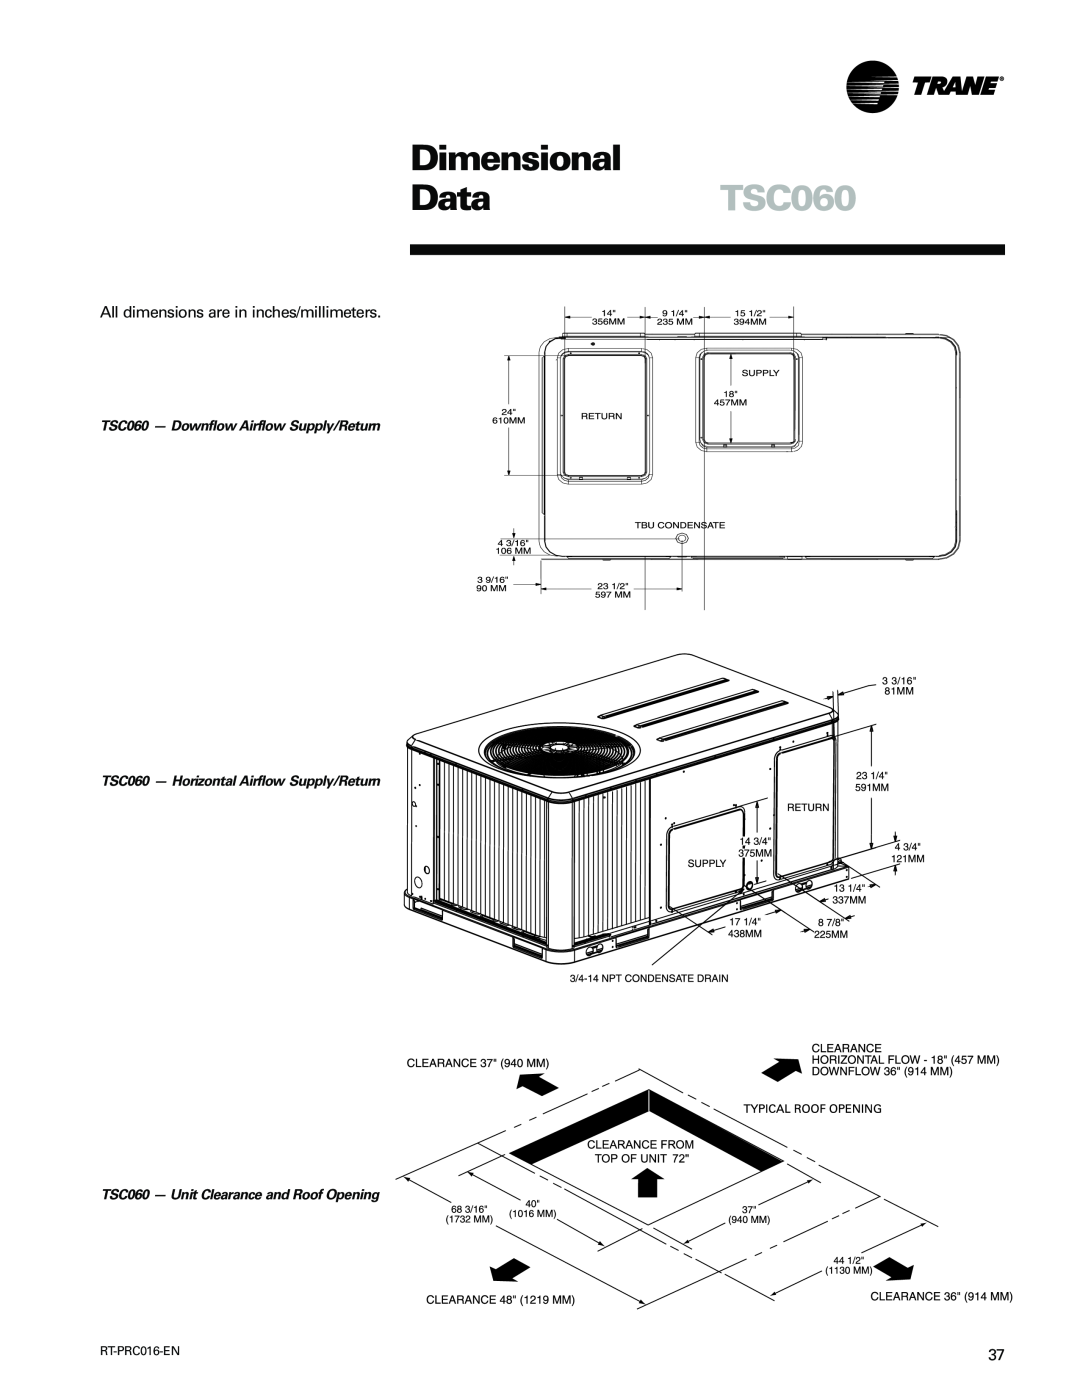 Trane TSC060-120 manual Dimensional, DataTSC060, All dimensions are in inches/millimeters 